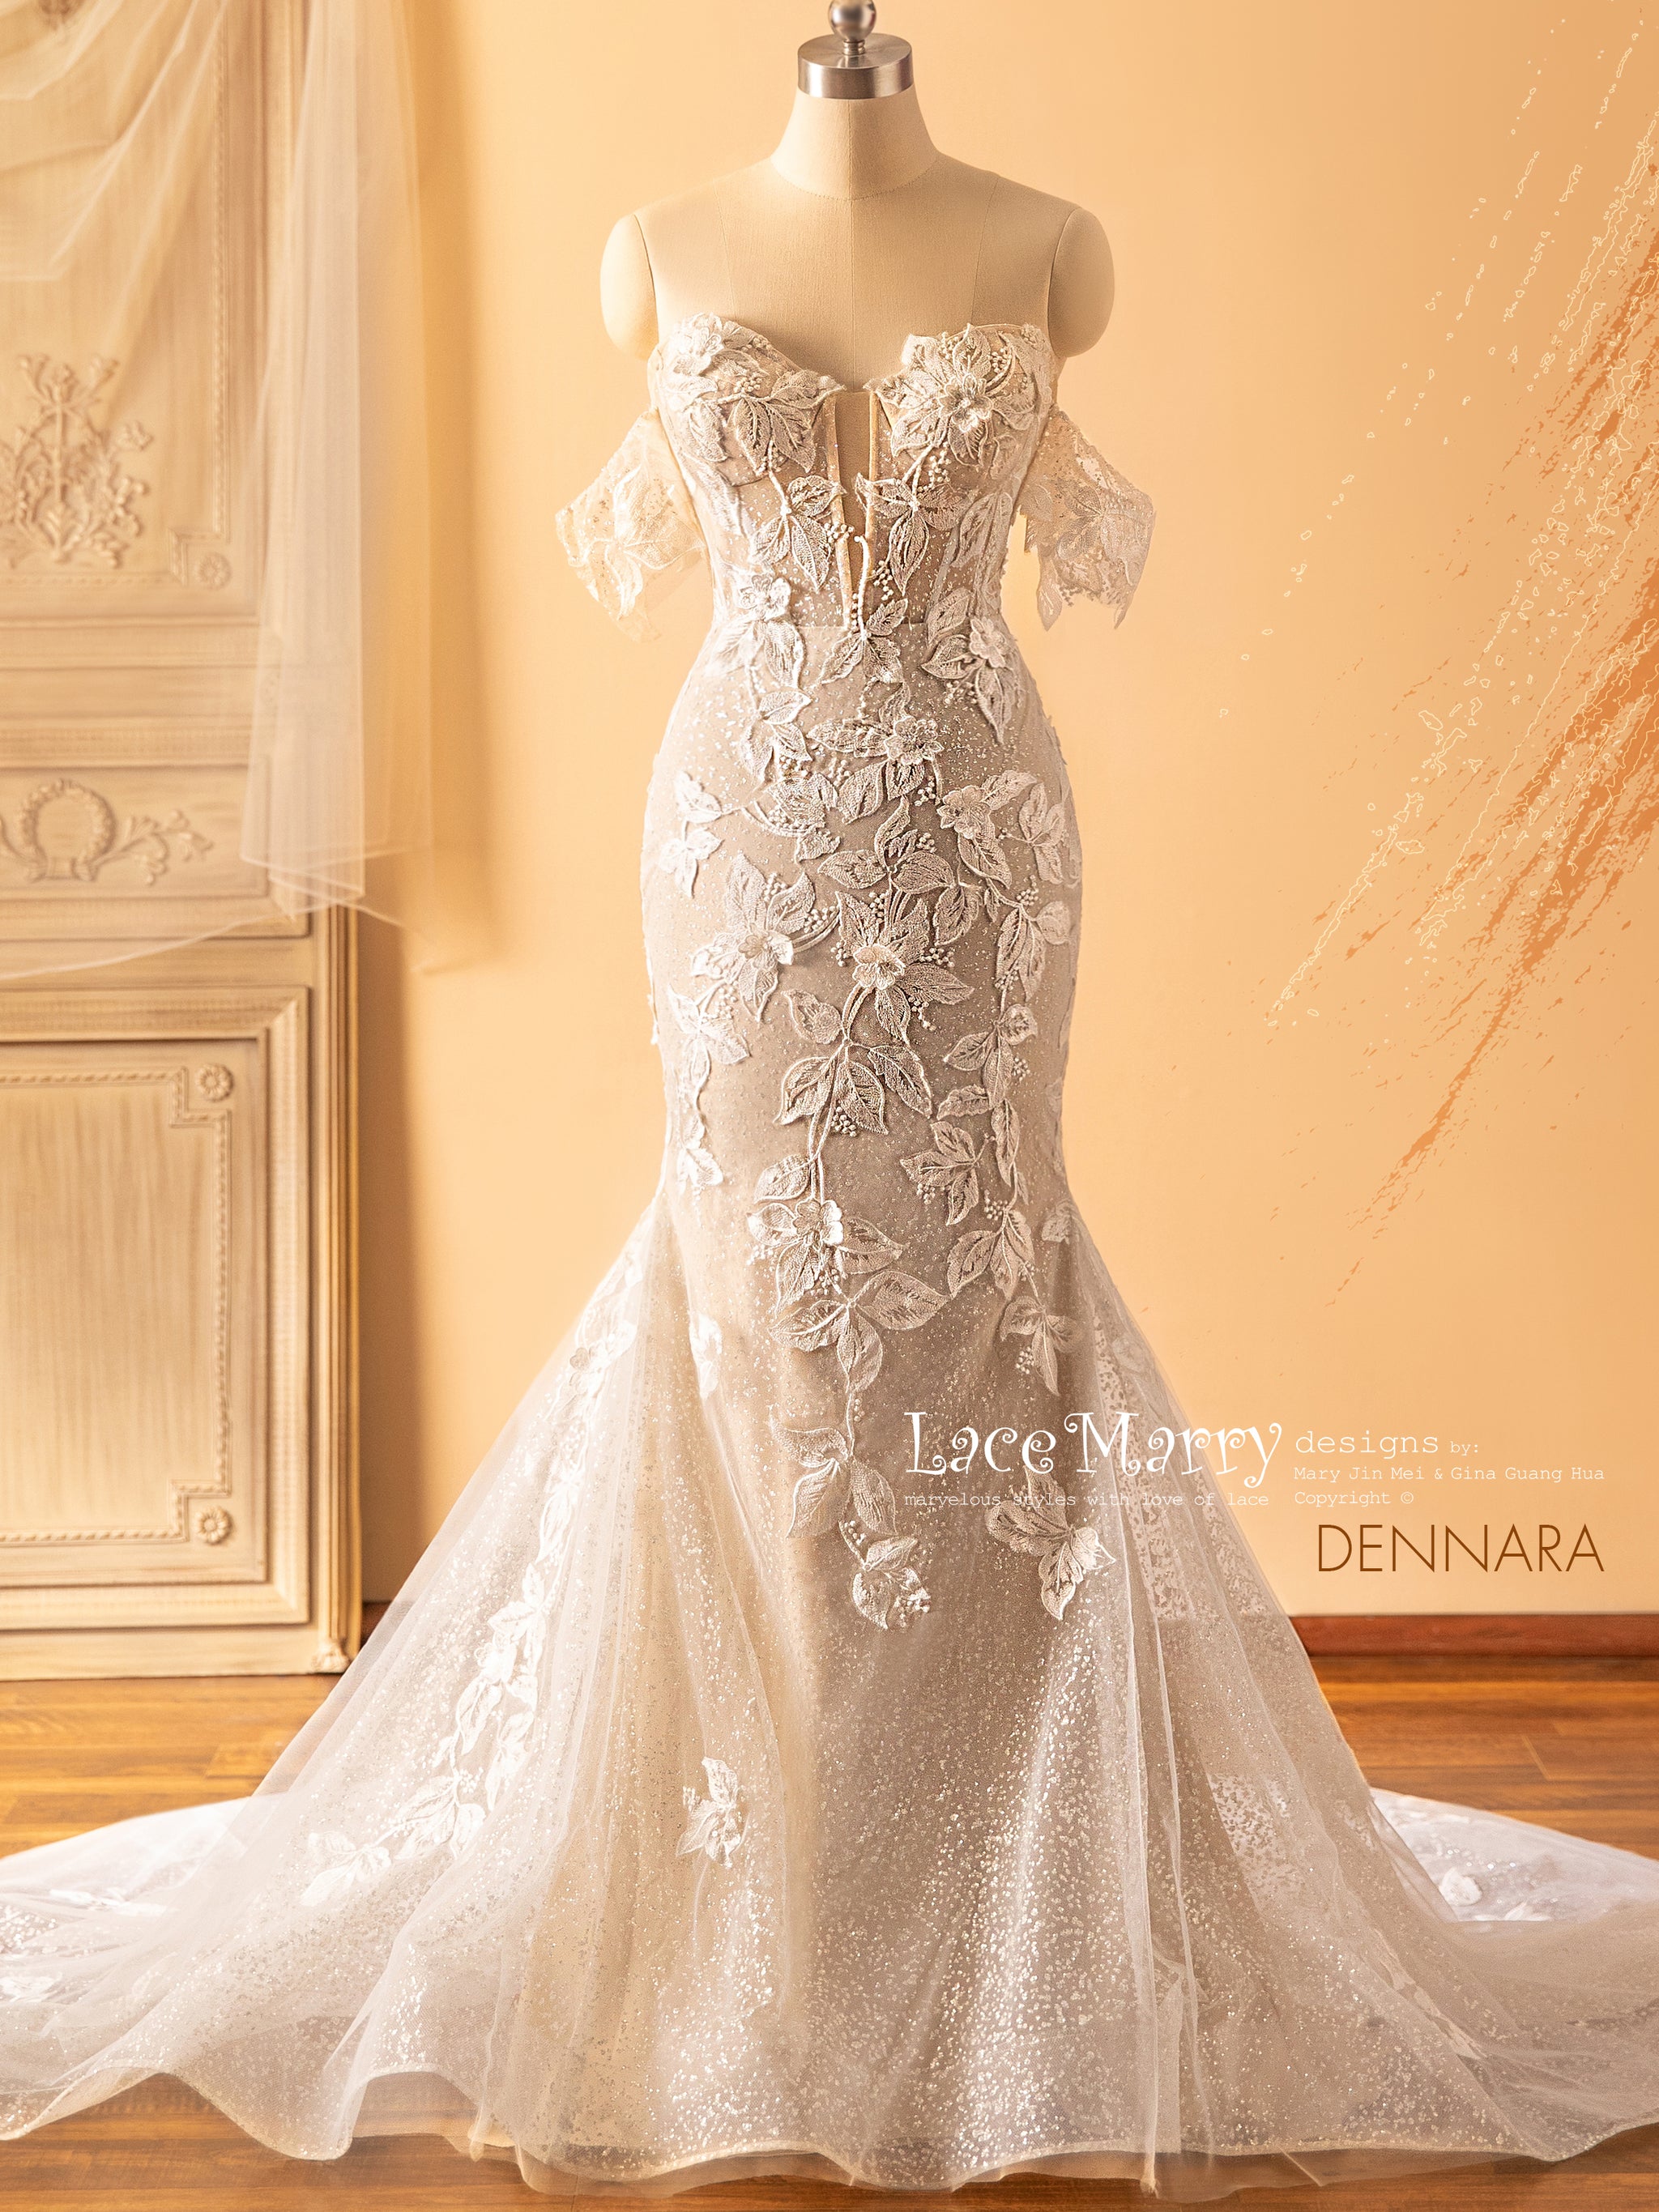 DENNARA / Floral Wedding Dress with Sparkling Glitter Tulle - LaceMarry